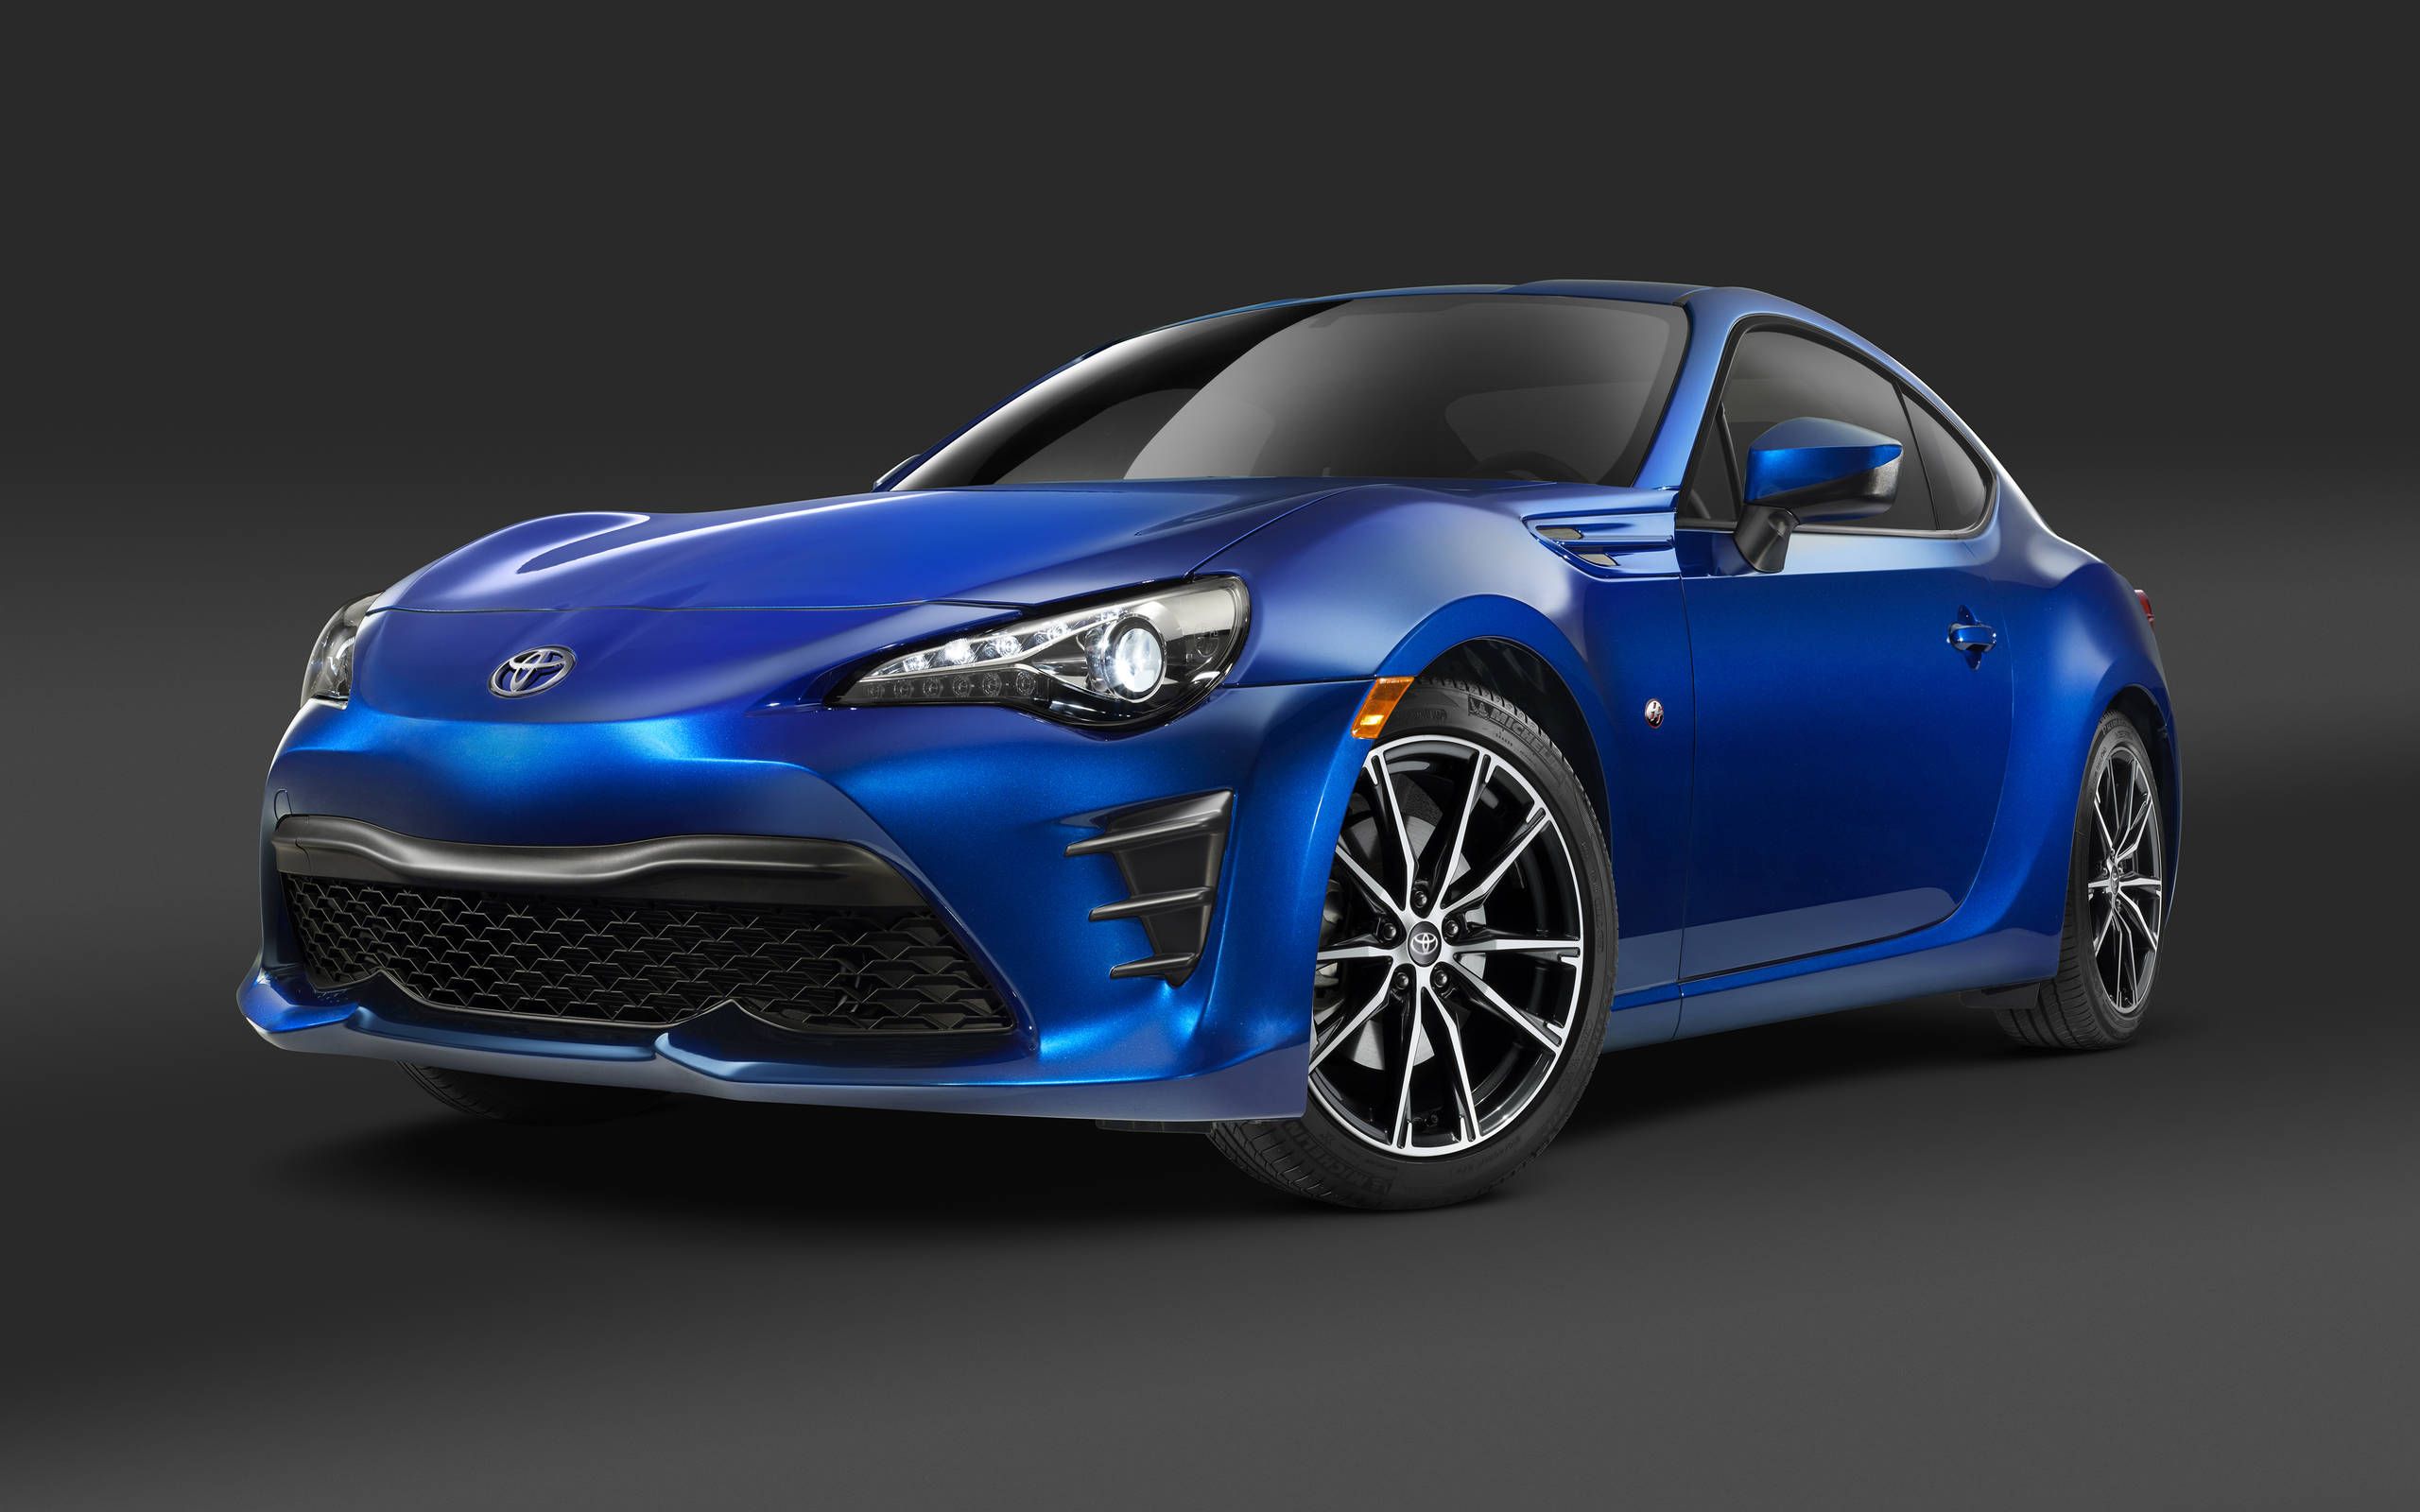 Scion FR-S becomes a Toyota, gets new '86' name at New York auto show